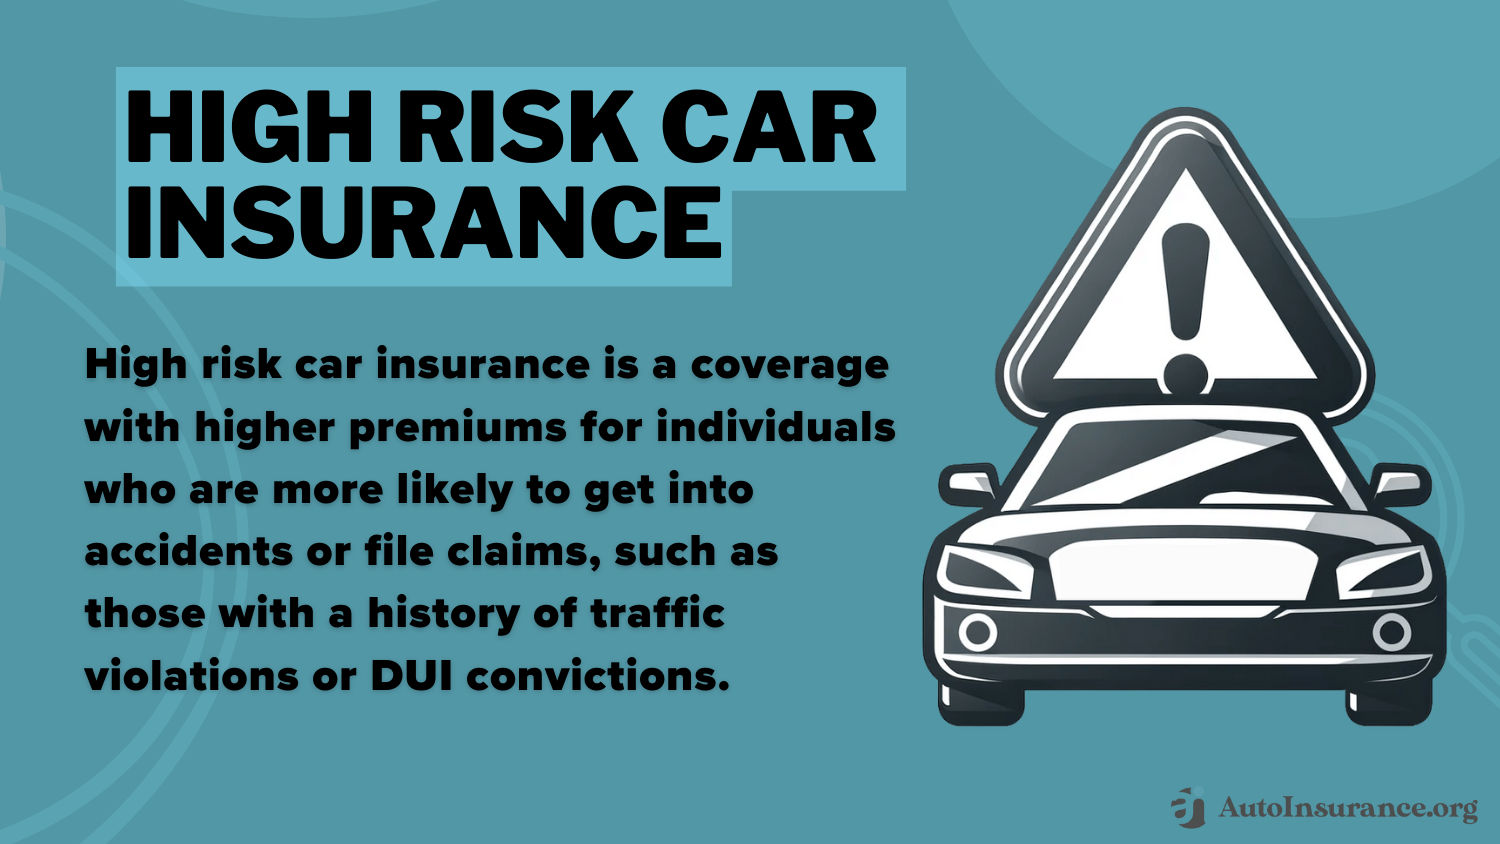 Government Assistance Programs for Low-Income Drivers: High Risk Car Insurance Definition Card